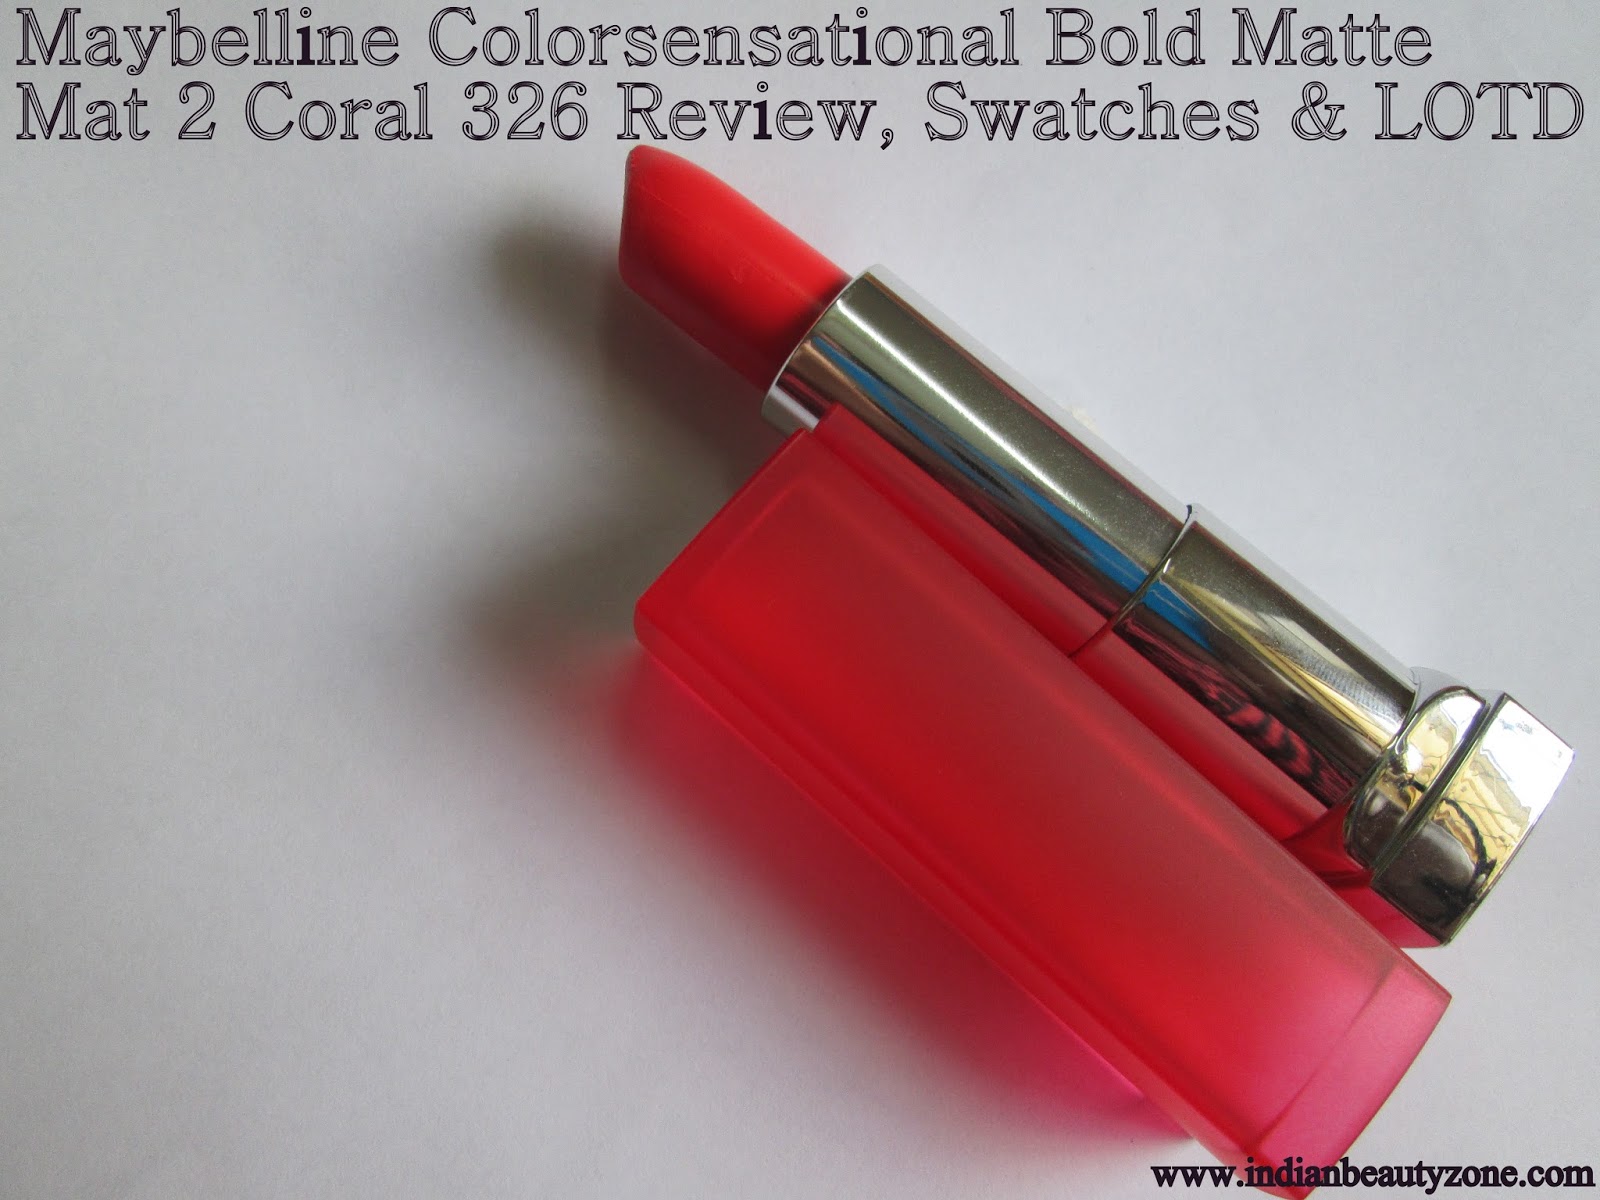 Indian Beauty Zone Maybelline Colorsensational Bold Matte Mat 2 Coral 326 Review, Swatches & LOTD